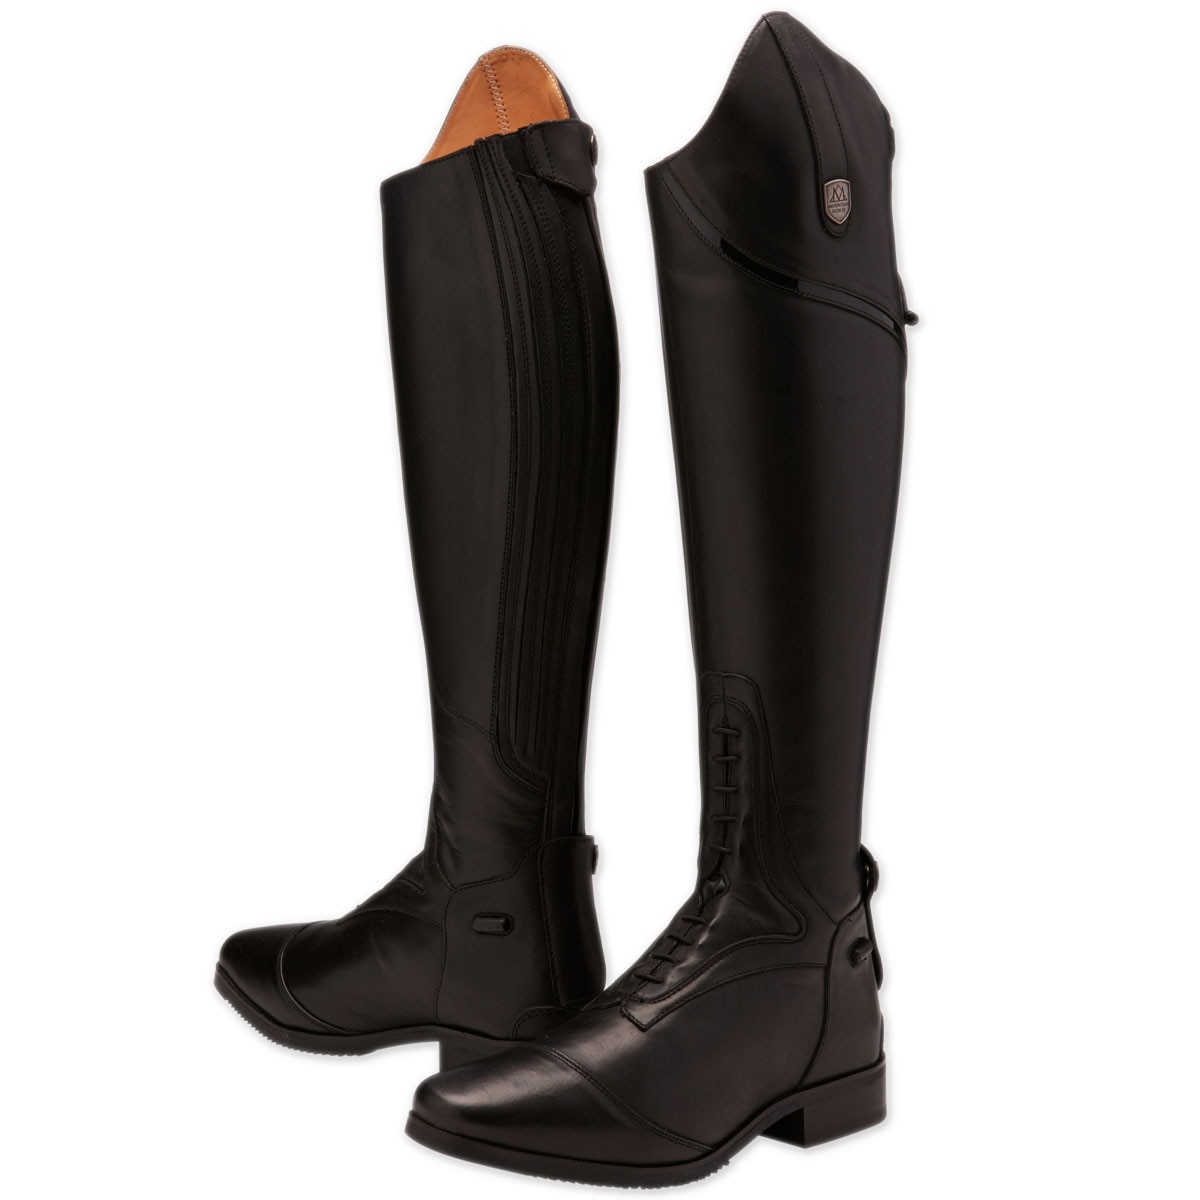 Mountain Horse Sovereign High Rider Long Boots Choose Size and Colour! 